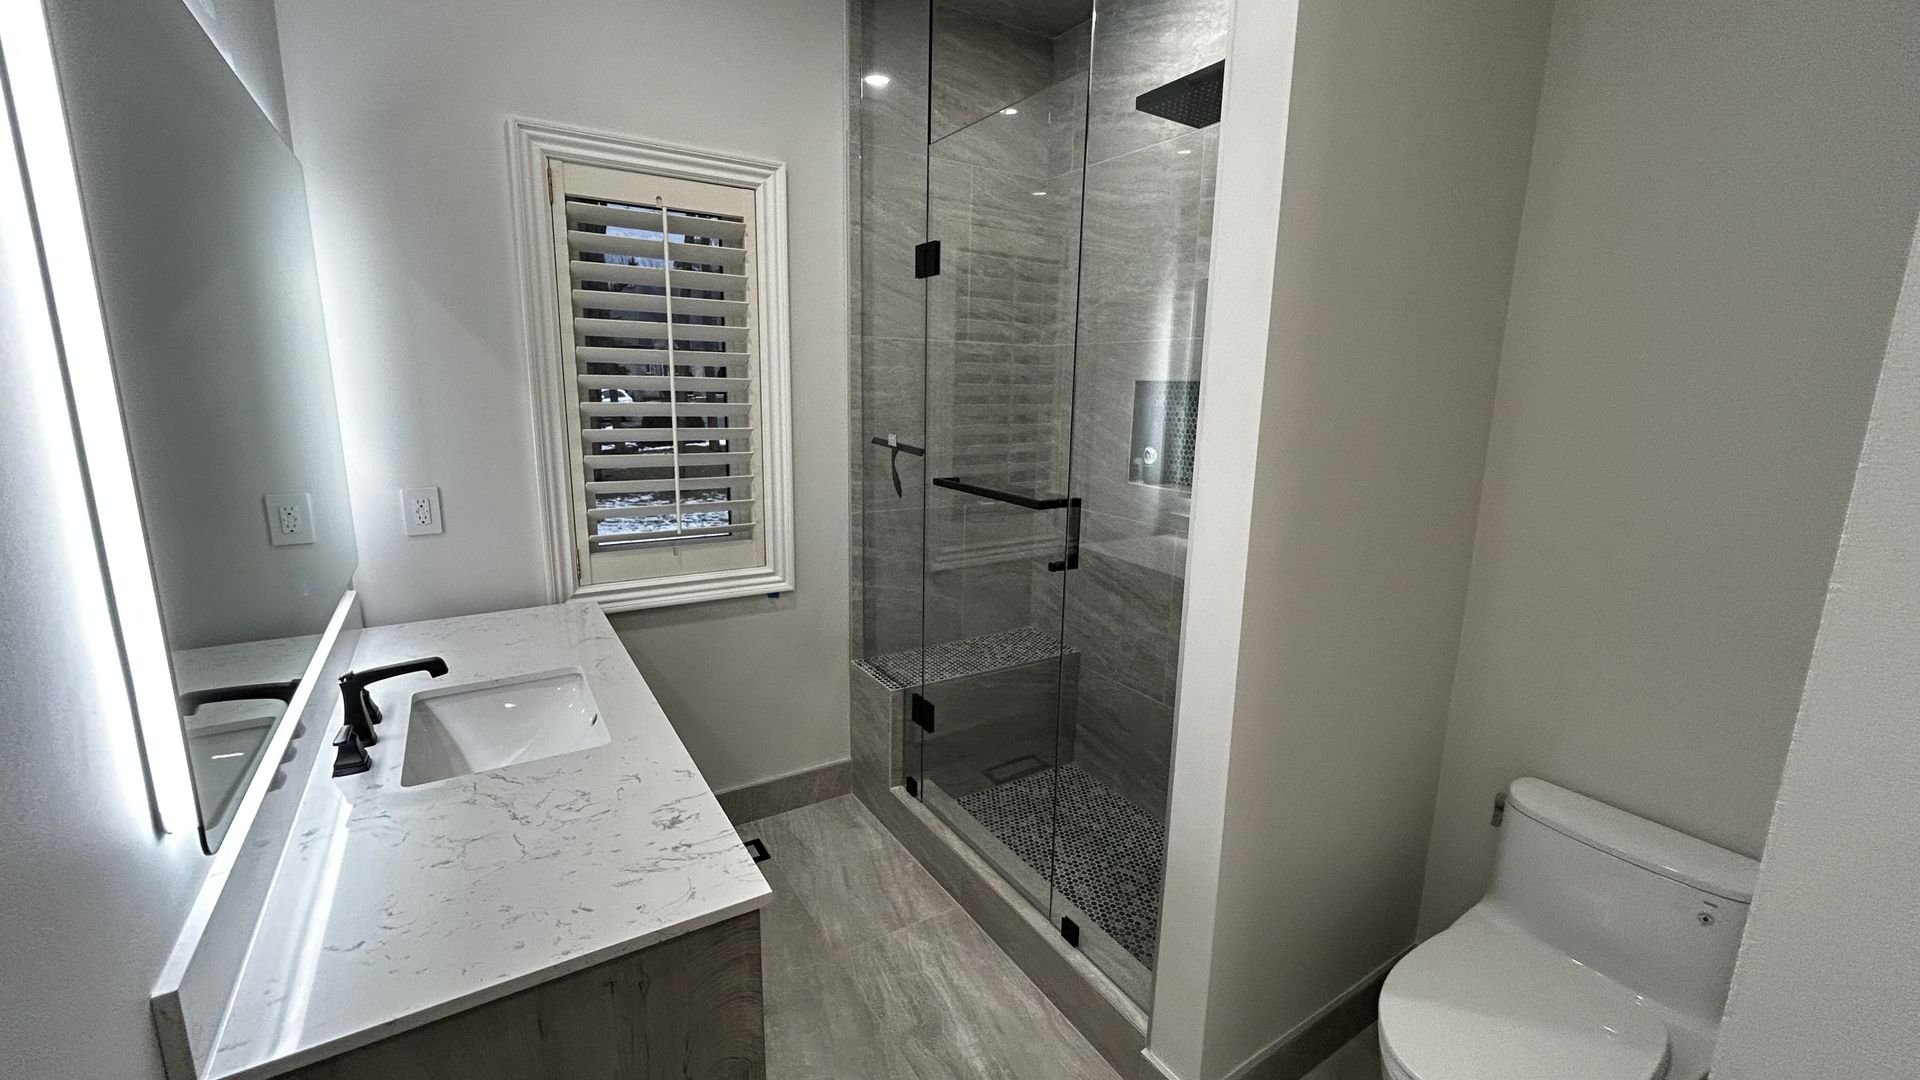 a well-furnished bathroom with modern fixtures